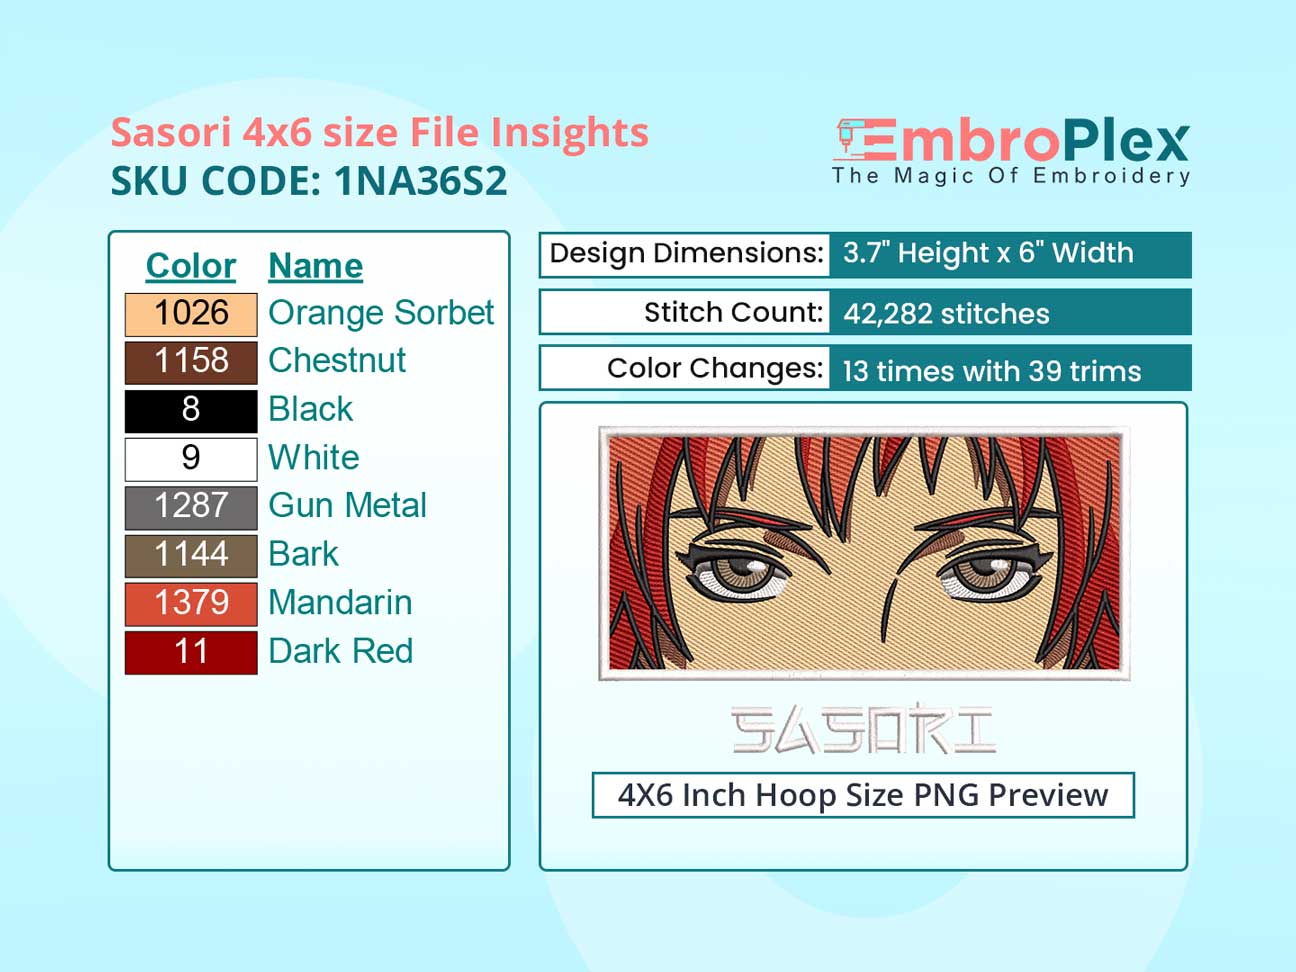 Anime-Inspired Sasori Embroidery Design File - 4x6 Inch hoop Size Variation overview image